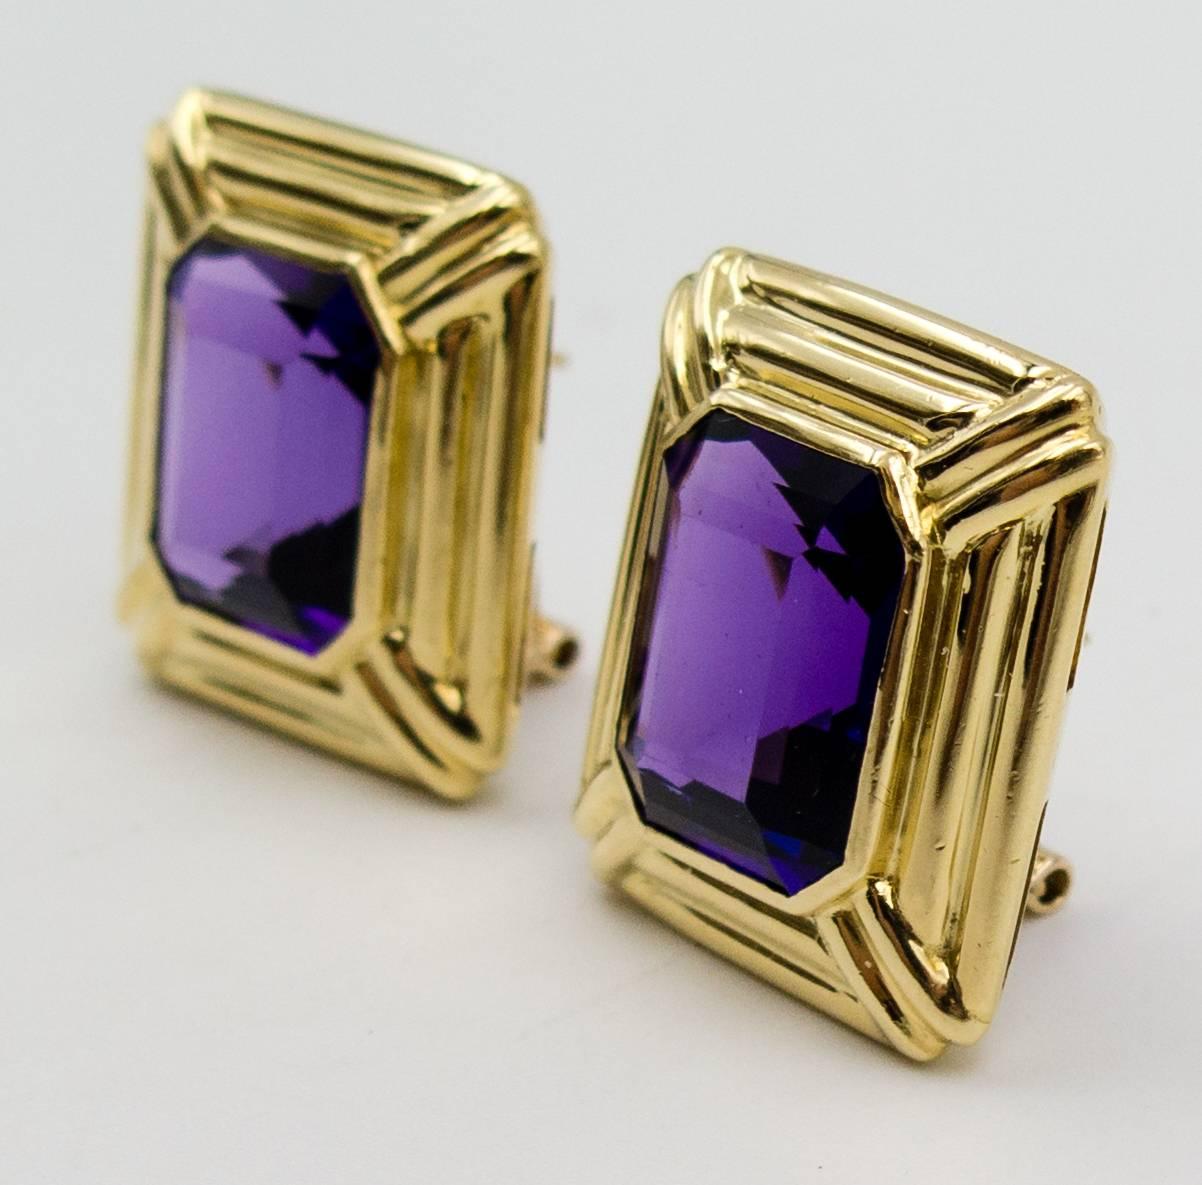 Sometimes simple is best, and these earclips fall into that category.   Large, excellent color deep purple emerald cut amethysts sit within a triple border 18 karat gold frame, and affix to the earlobe with a simple yet sturdy omega back.   The